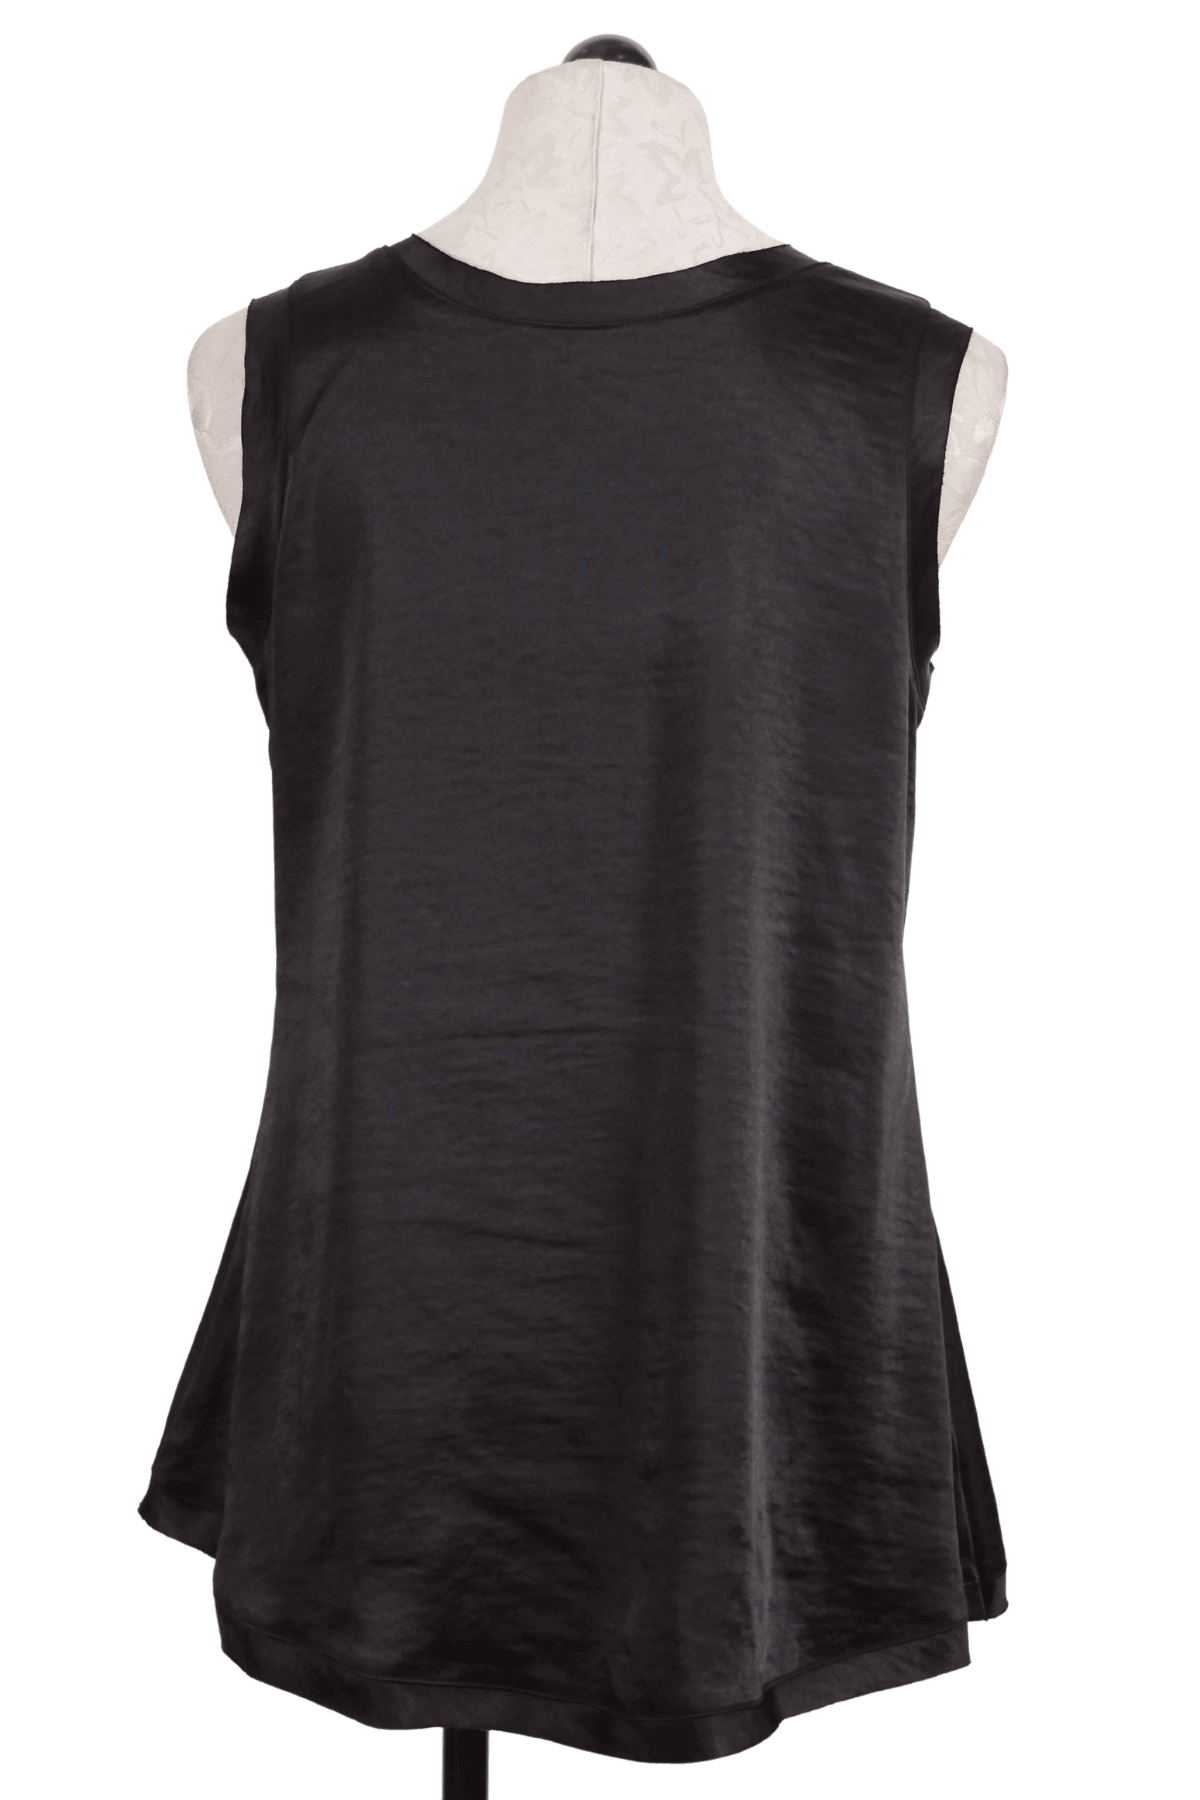 back view of black Sateen Shirtail Tank by Planet